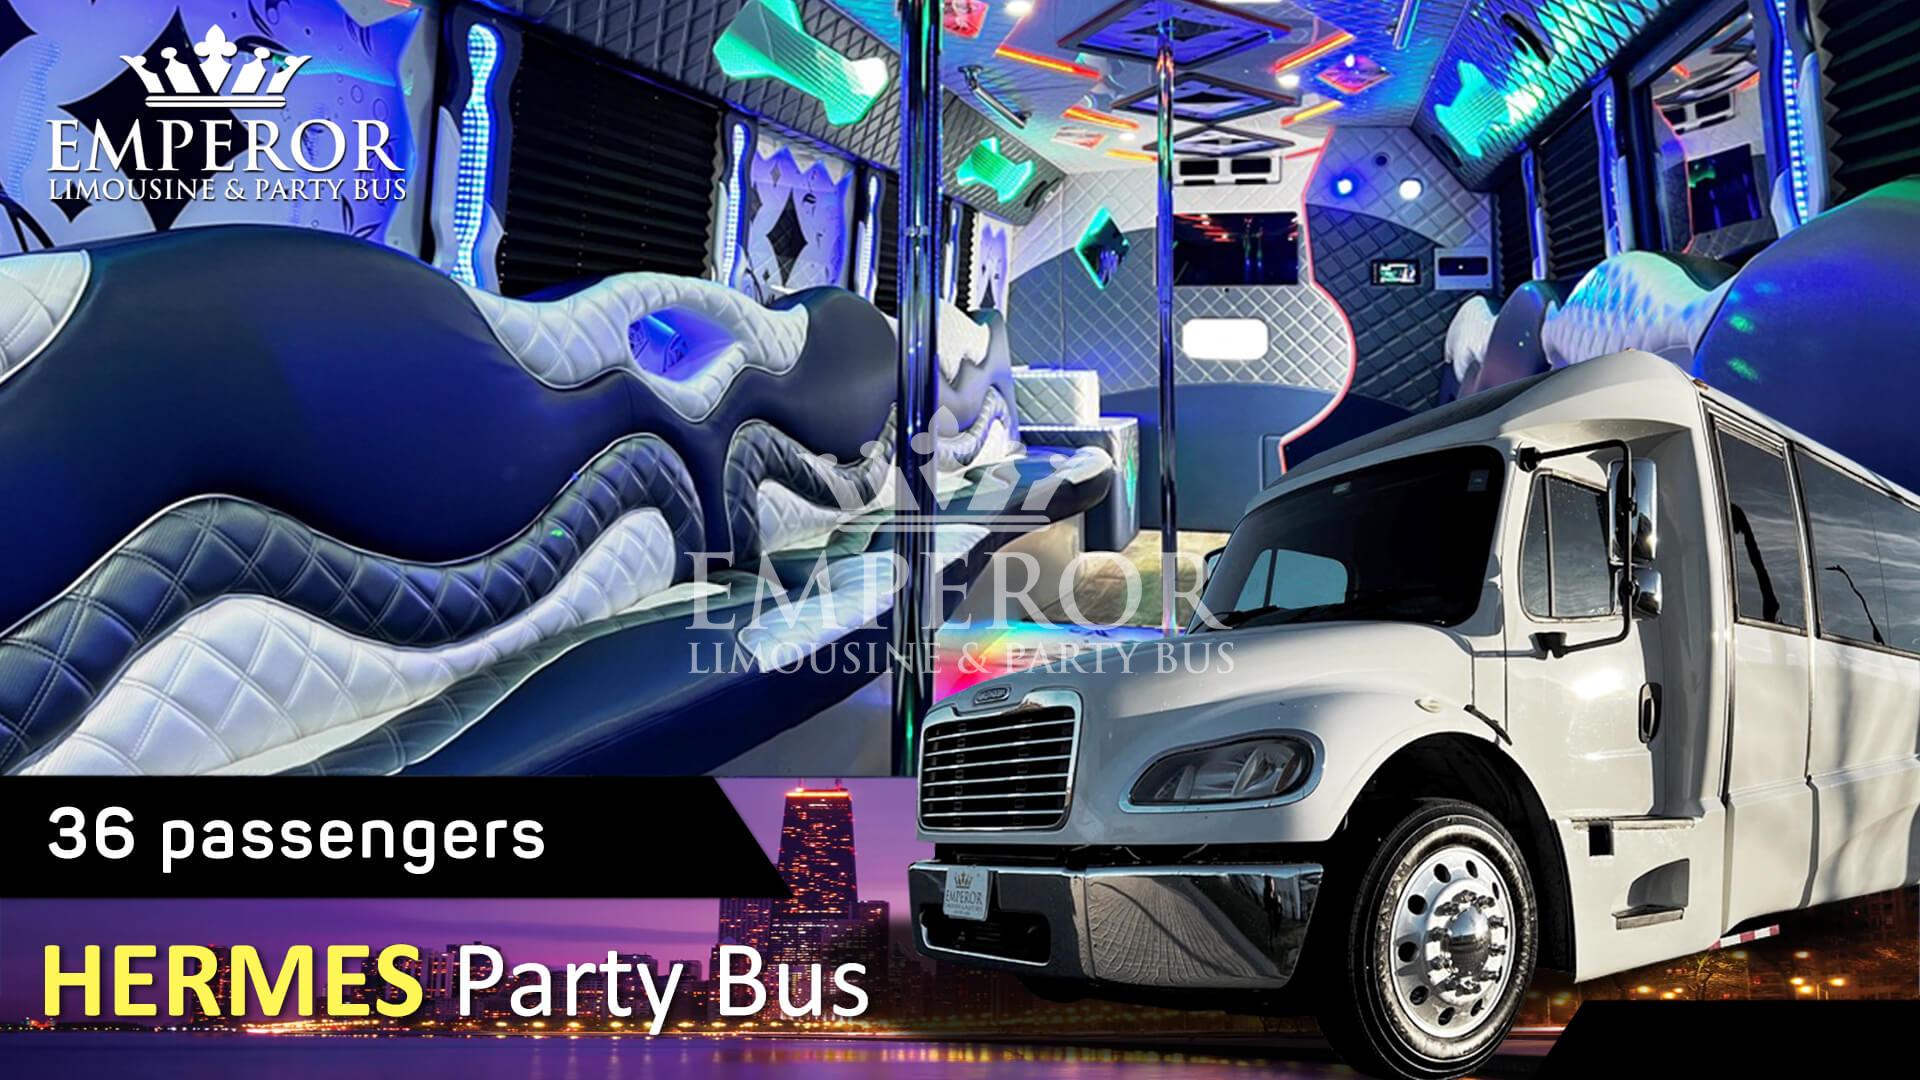 Party bus rental in Brookfield, IL - Hermes Edition